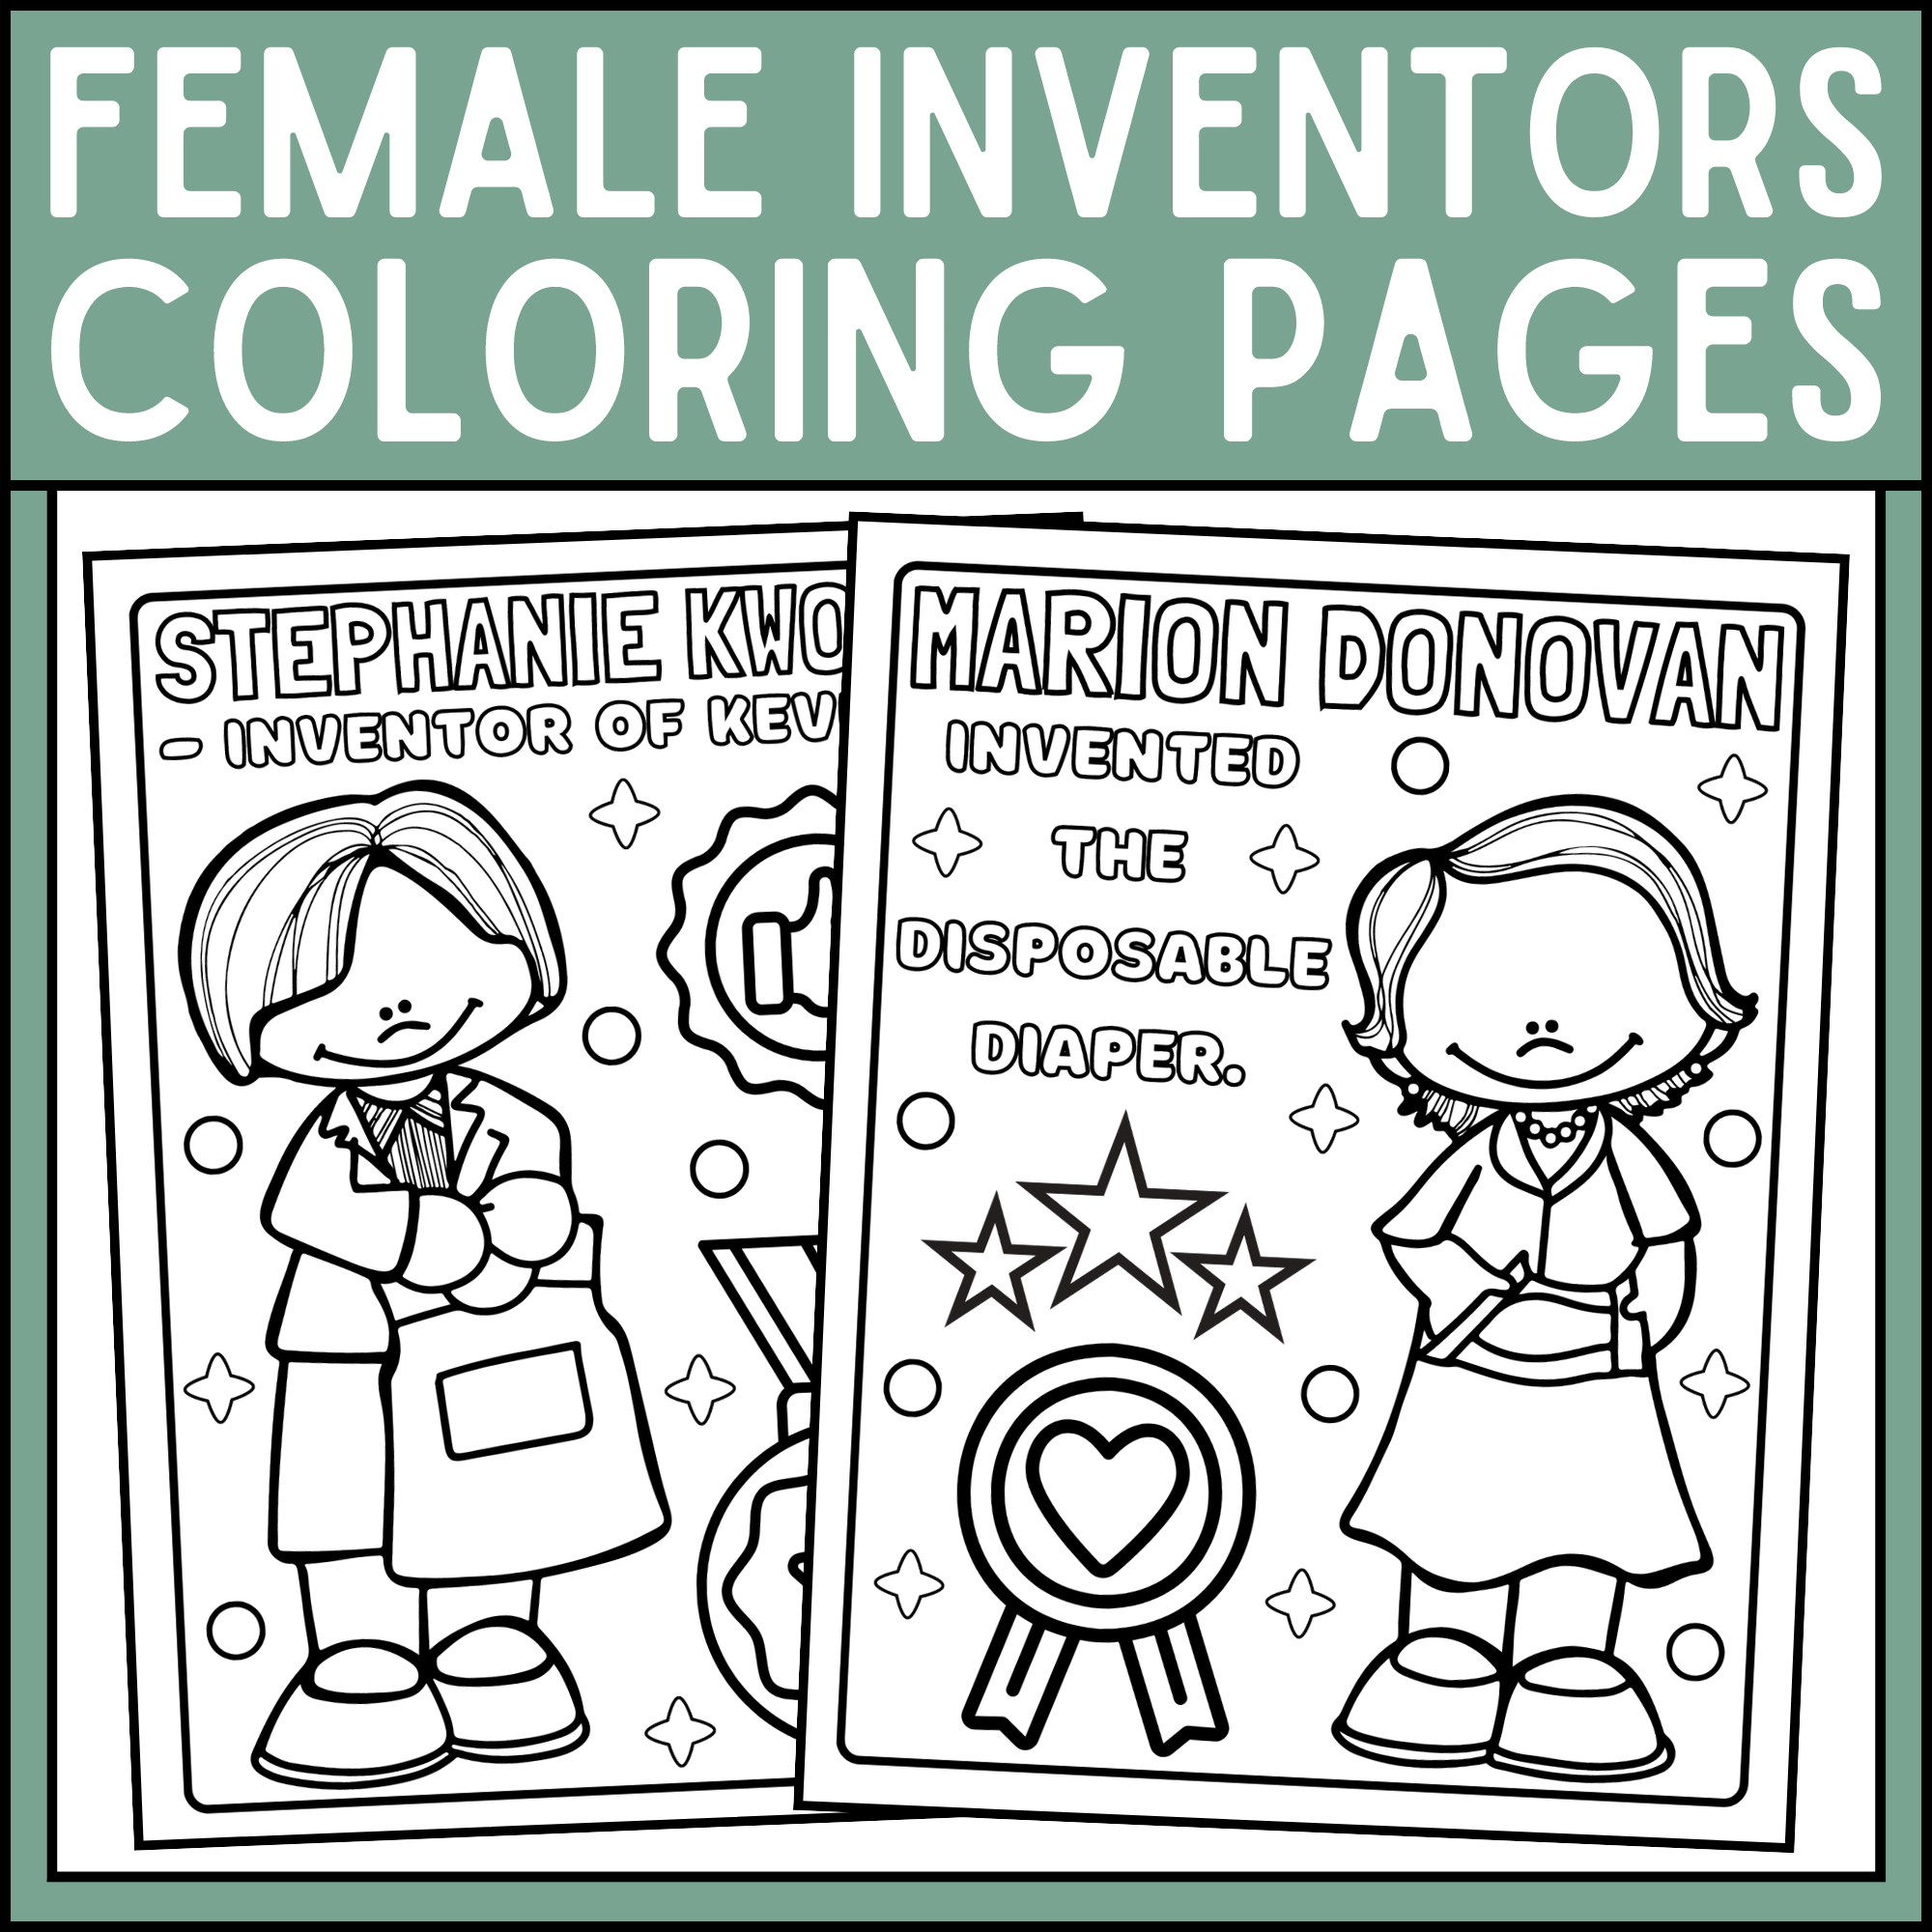 Female inventors coloring pages womens history month coloring pages made by teachers